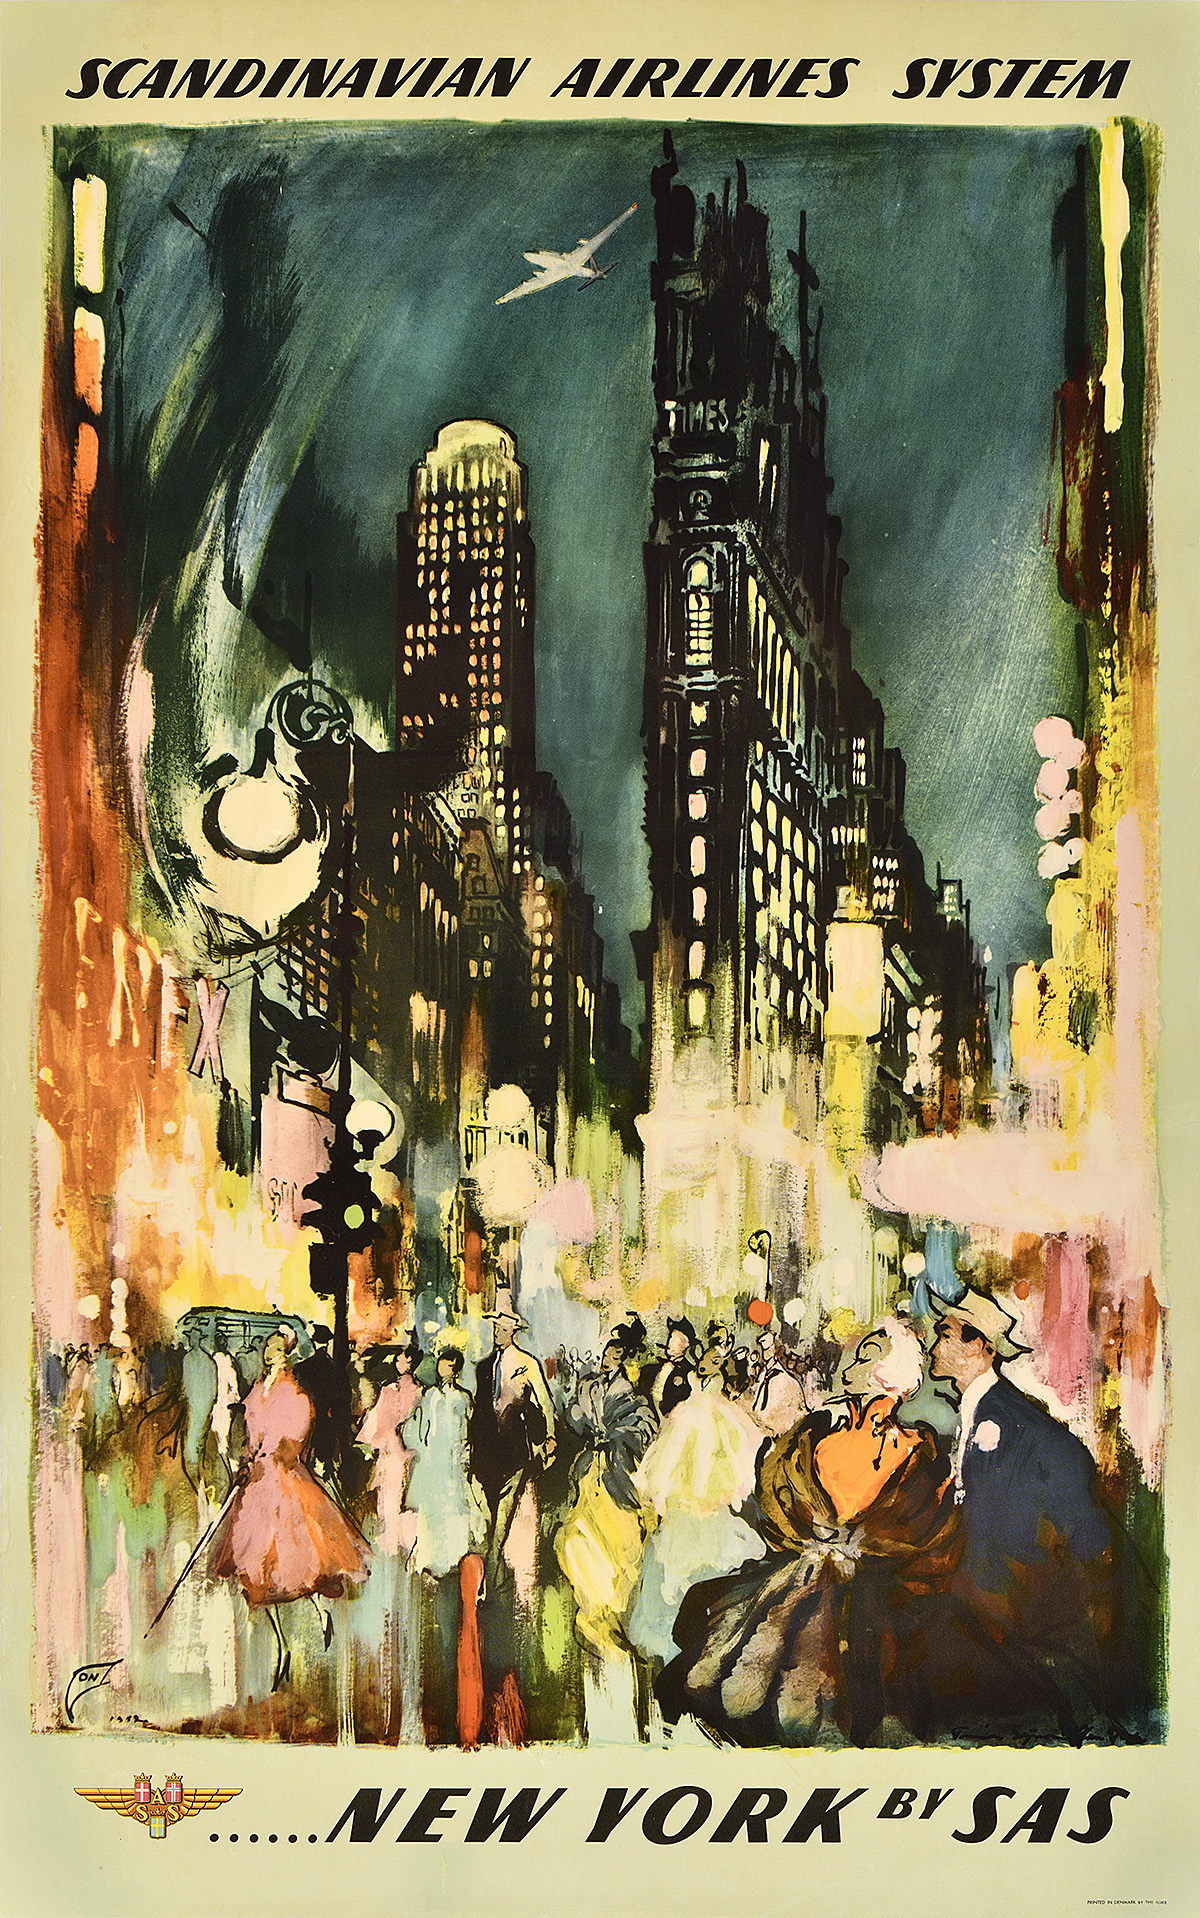 A dreamy poster of a crowd of people walking through Times Square and several prominent buildings.